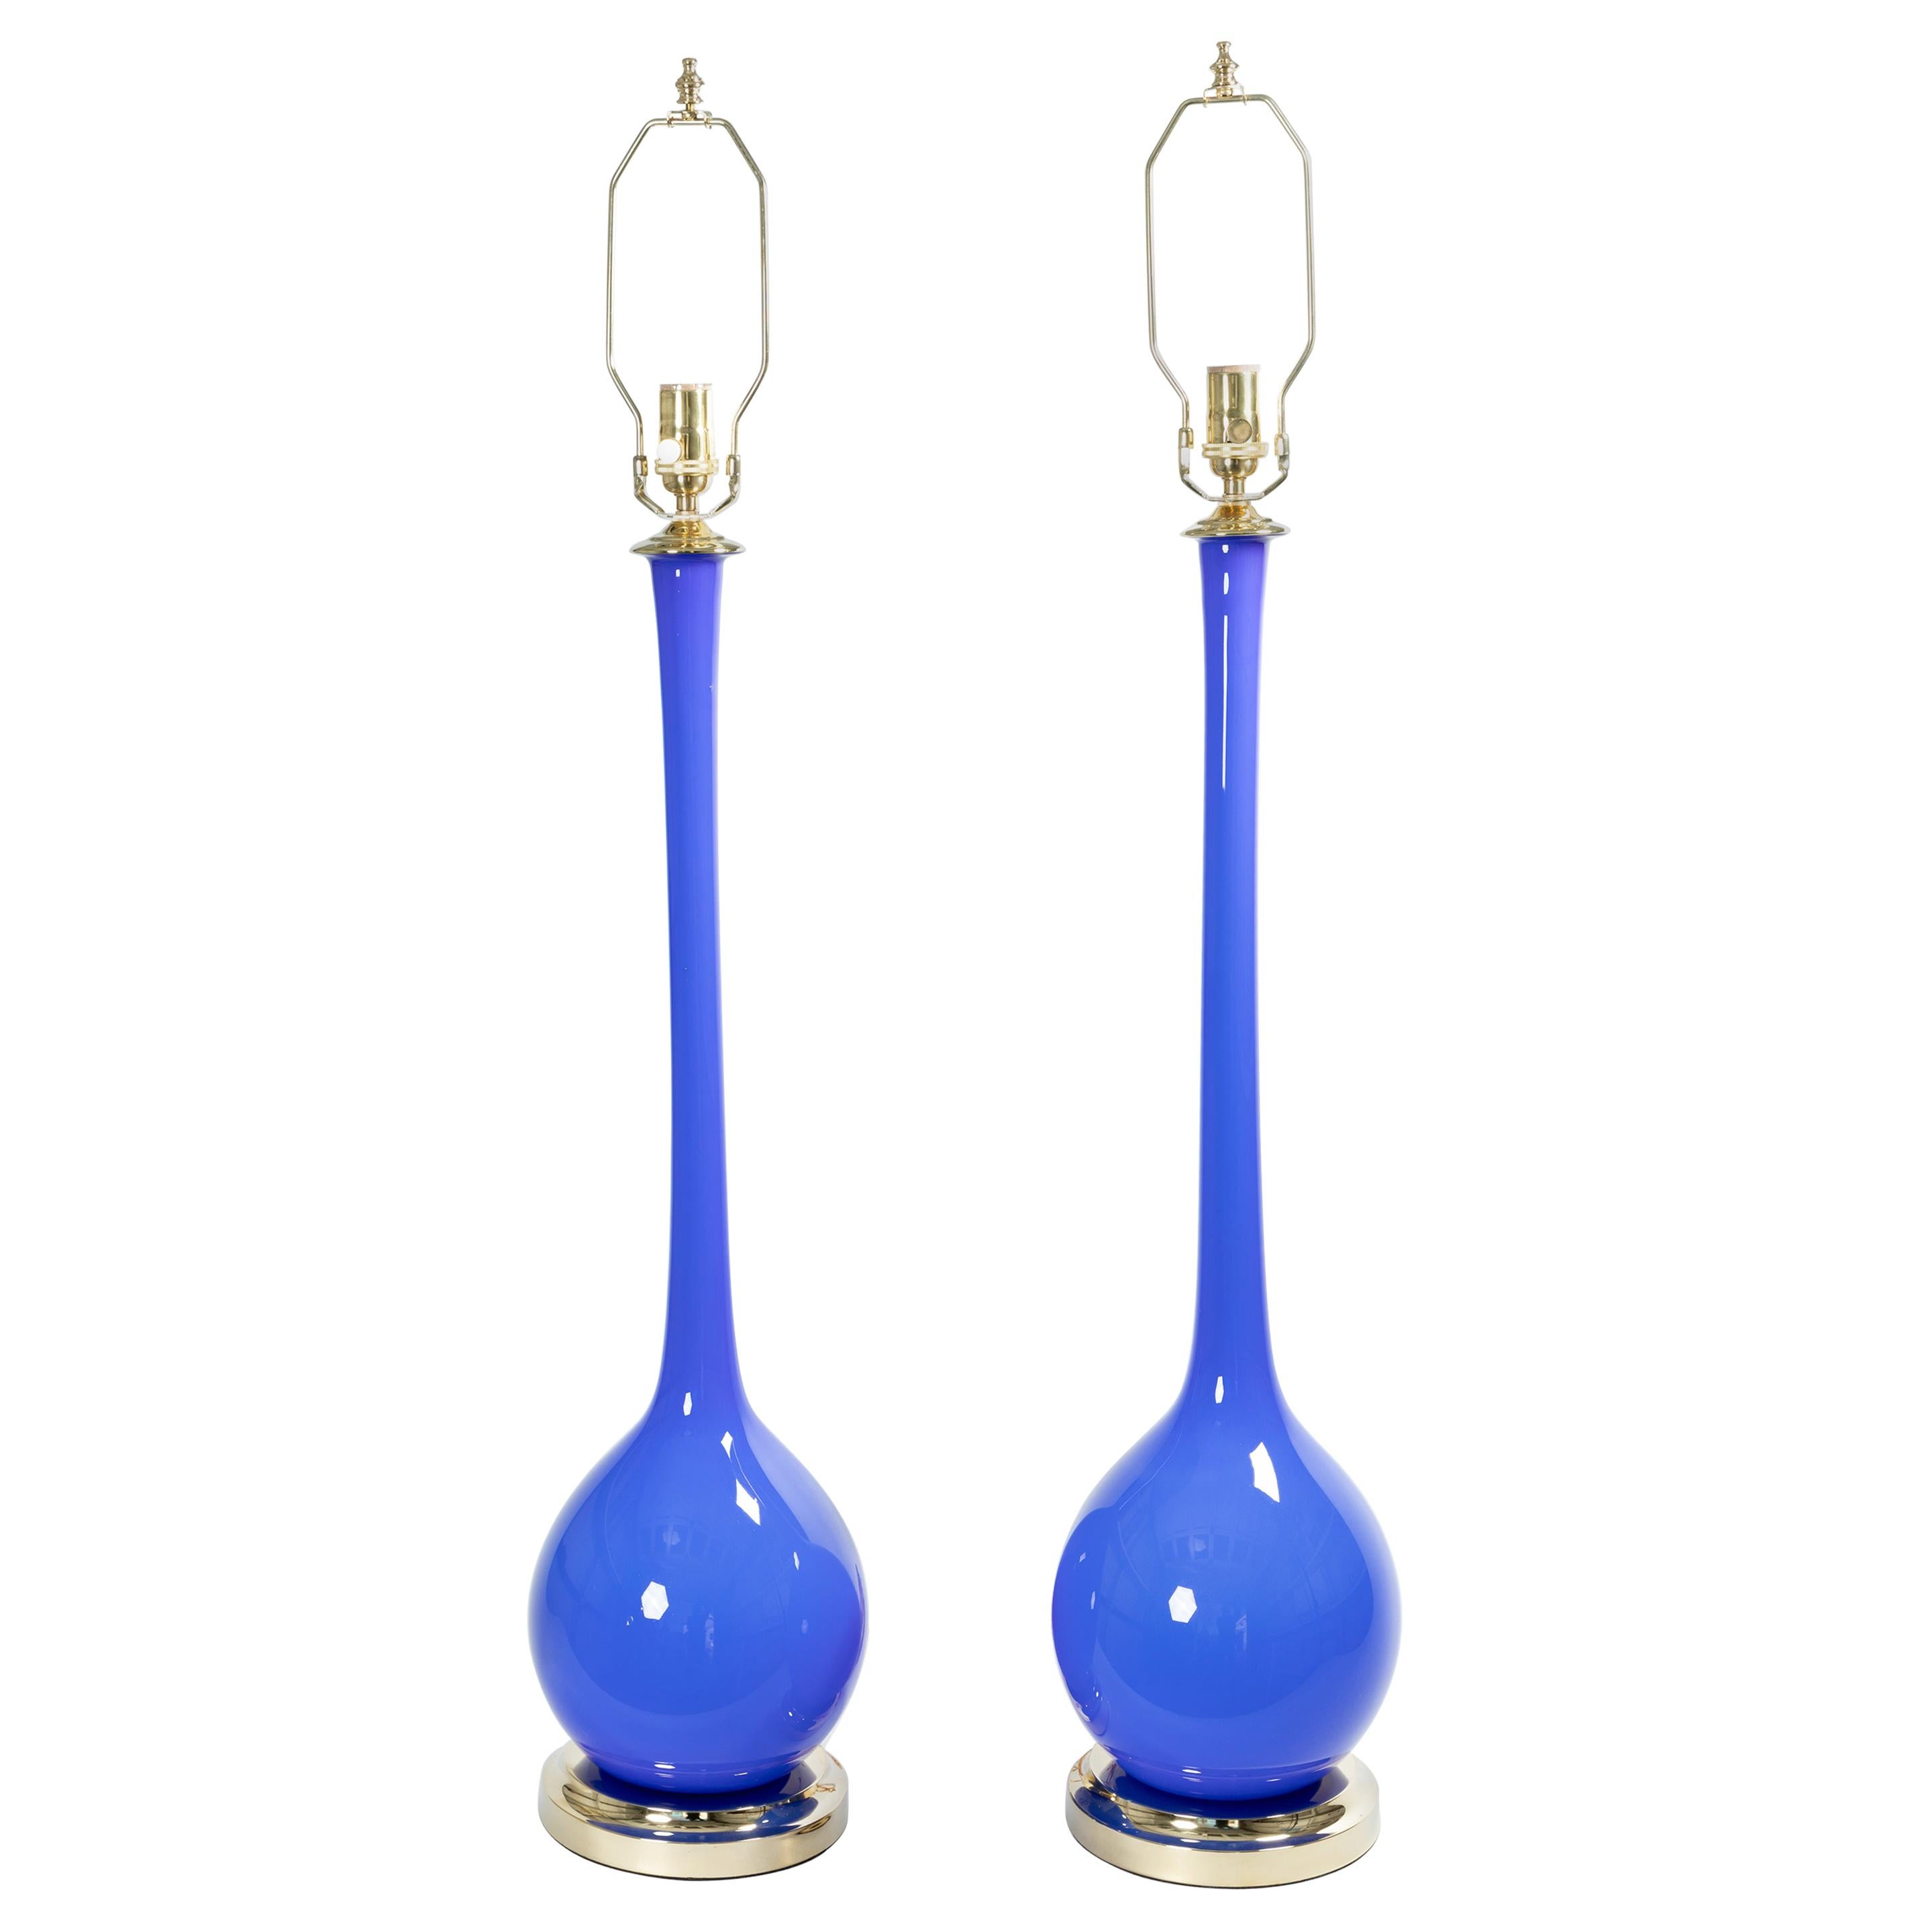 Pair of Tall Long Neck Blue Murano Glass Table Lamps with Brass Detail